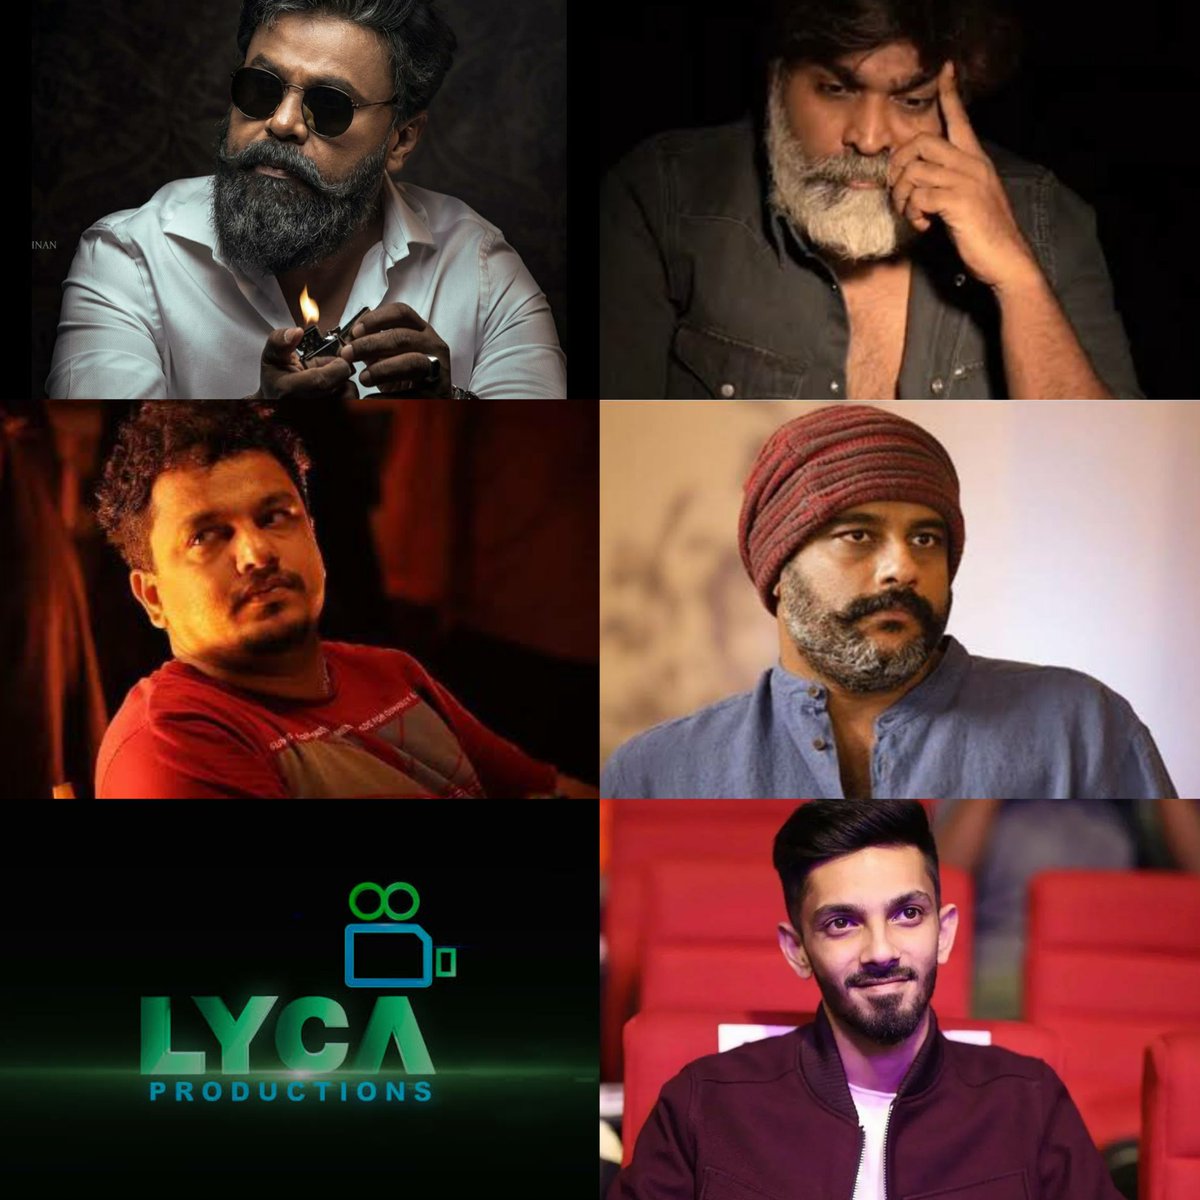 RUMOUR...RUMOUR...RUMOUR...!!

#D150
Cast - #Dileep, #VijaySethupathi
Director - #RatheeshAmbatt
Writer - #MuraliGopi
Production -@LycaProductions (First mollywood production)
Music - Rockstar @anirudhofficial (Mollywood debut)🔥

One of the biggest projects of Dileep...!!